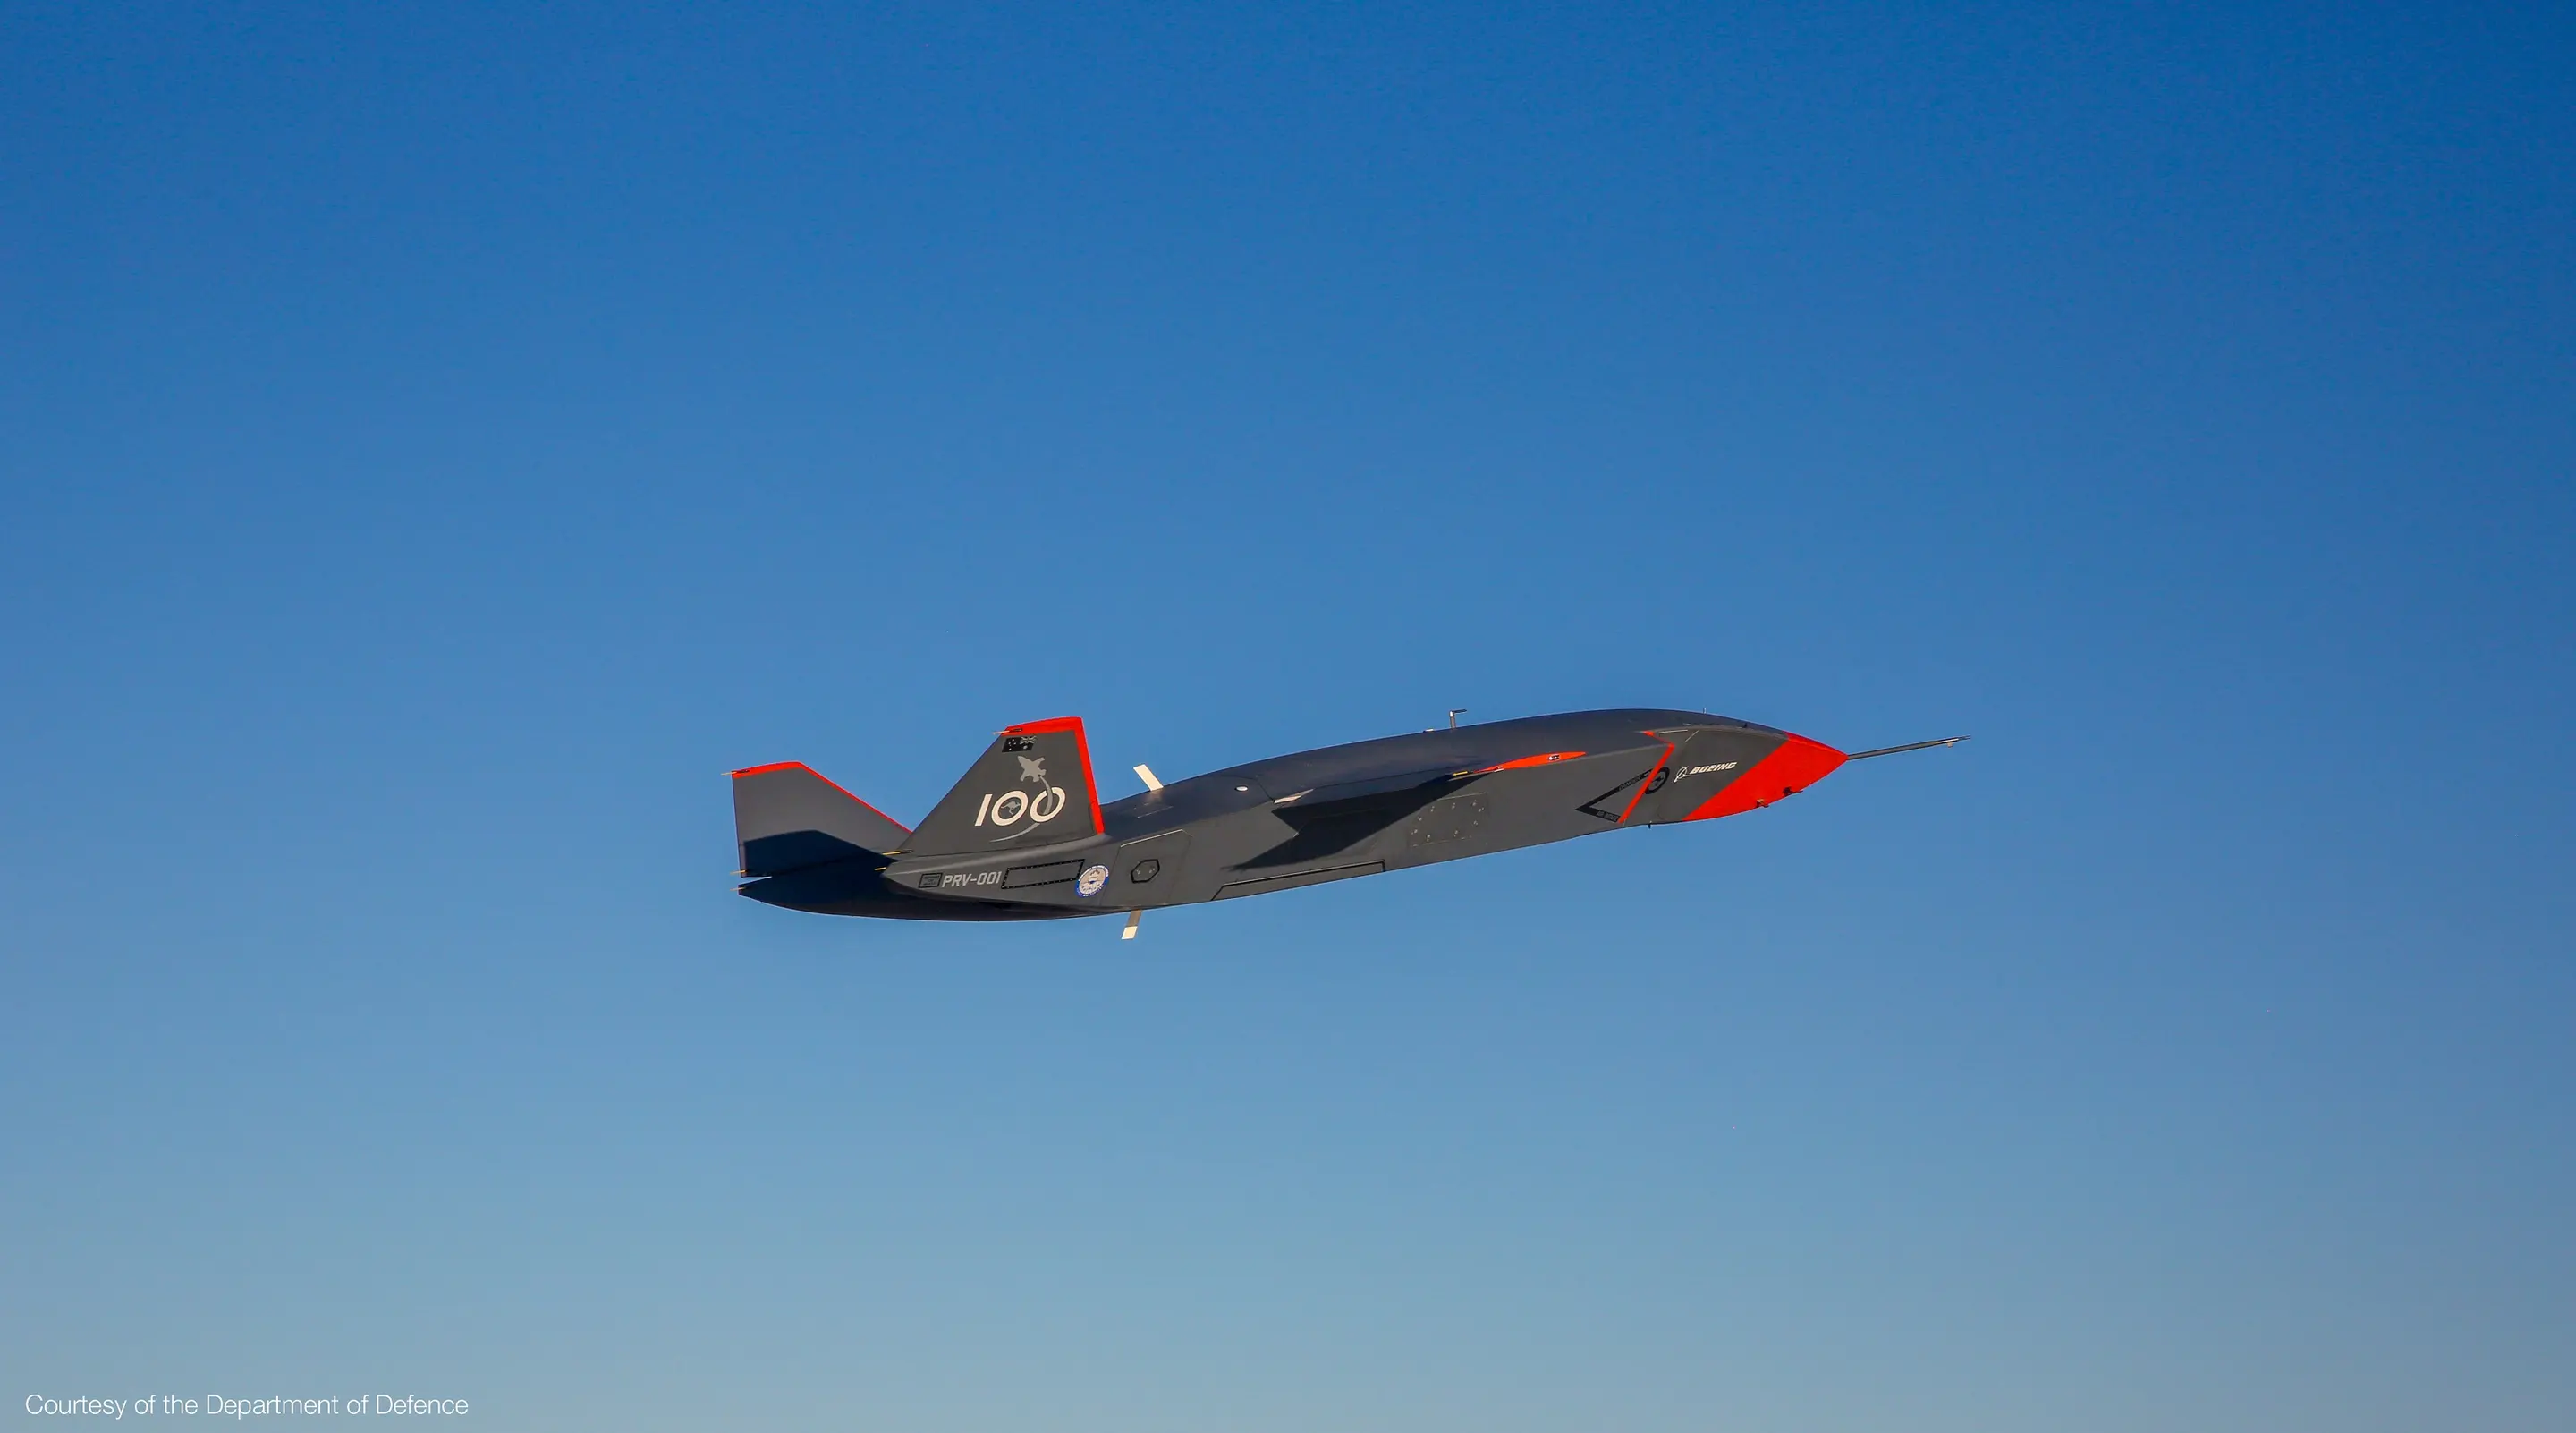 Drones for F-35A Lightning II - Poland may purchase MQ-28 Ghost Bat attack drones for fifth-generation fighters